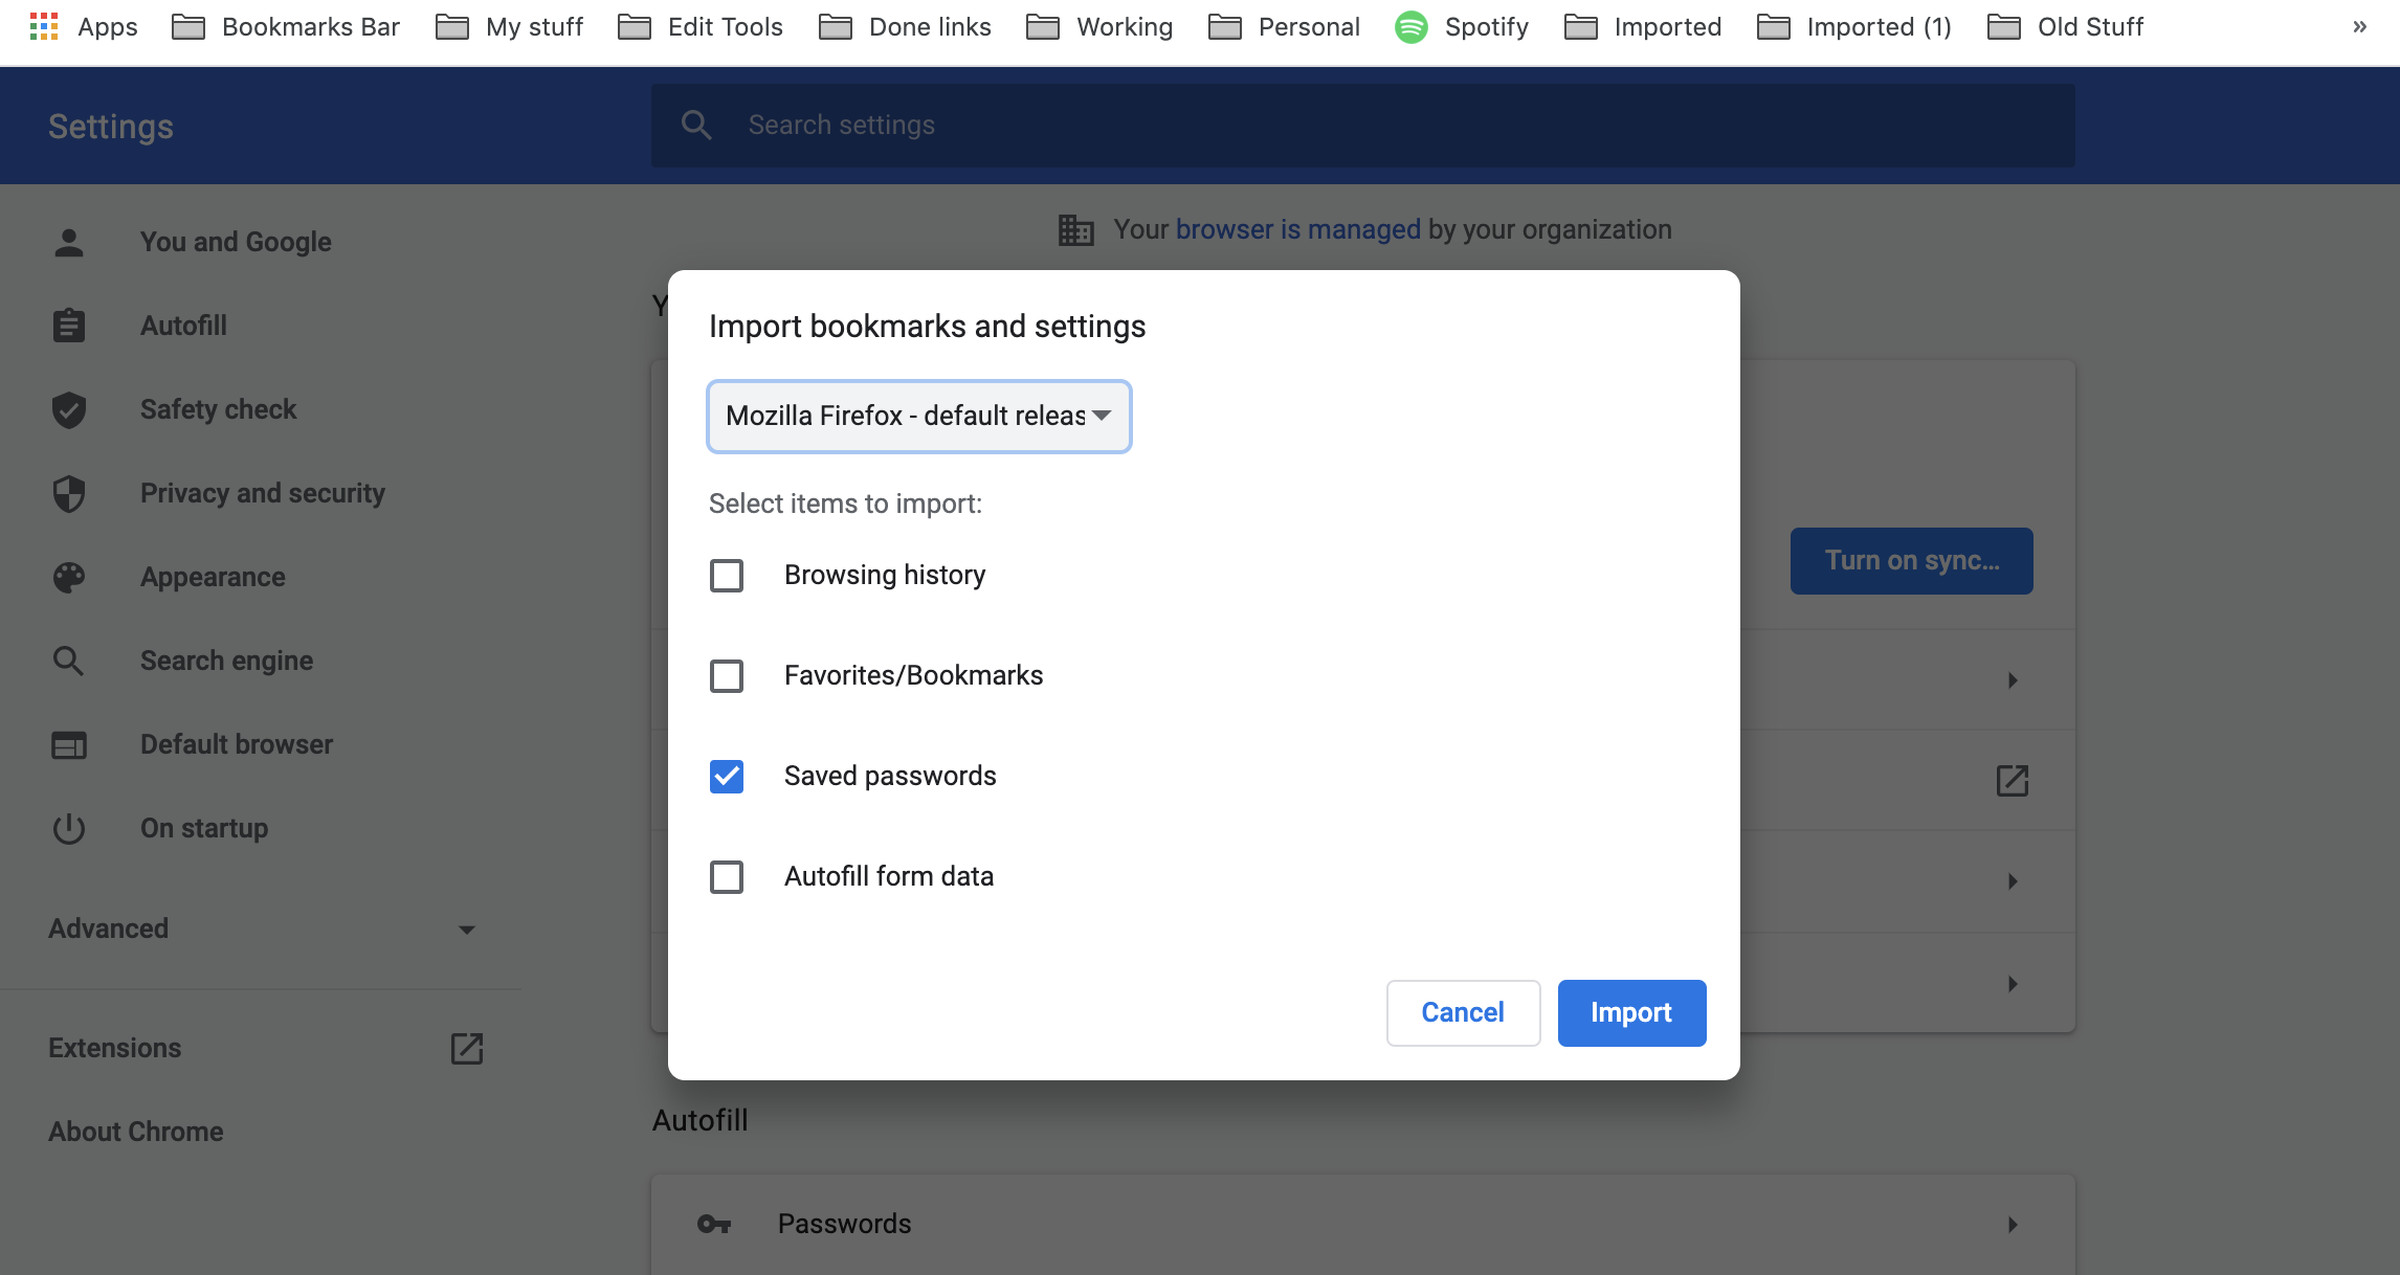 Chrome has no problem importing passwords from rival browsers